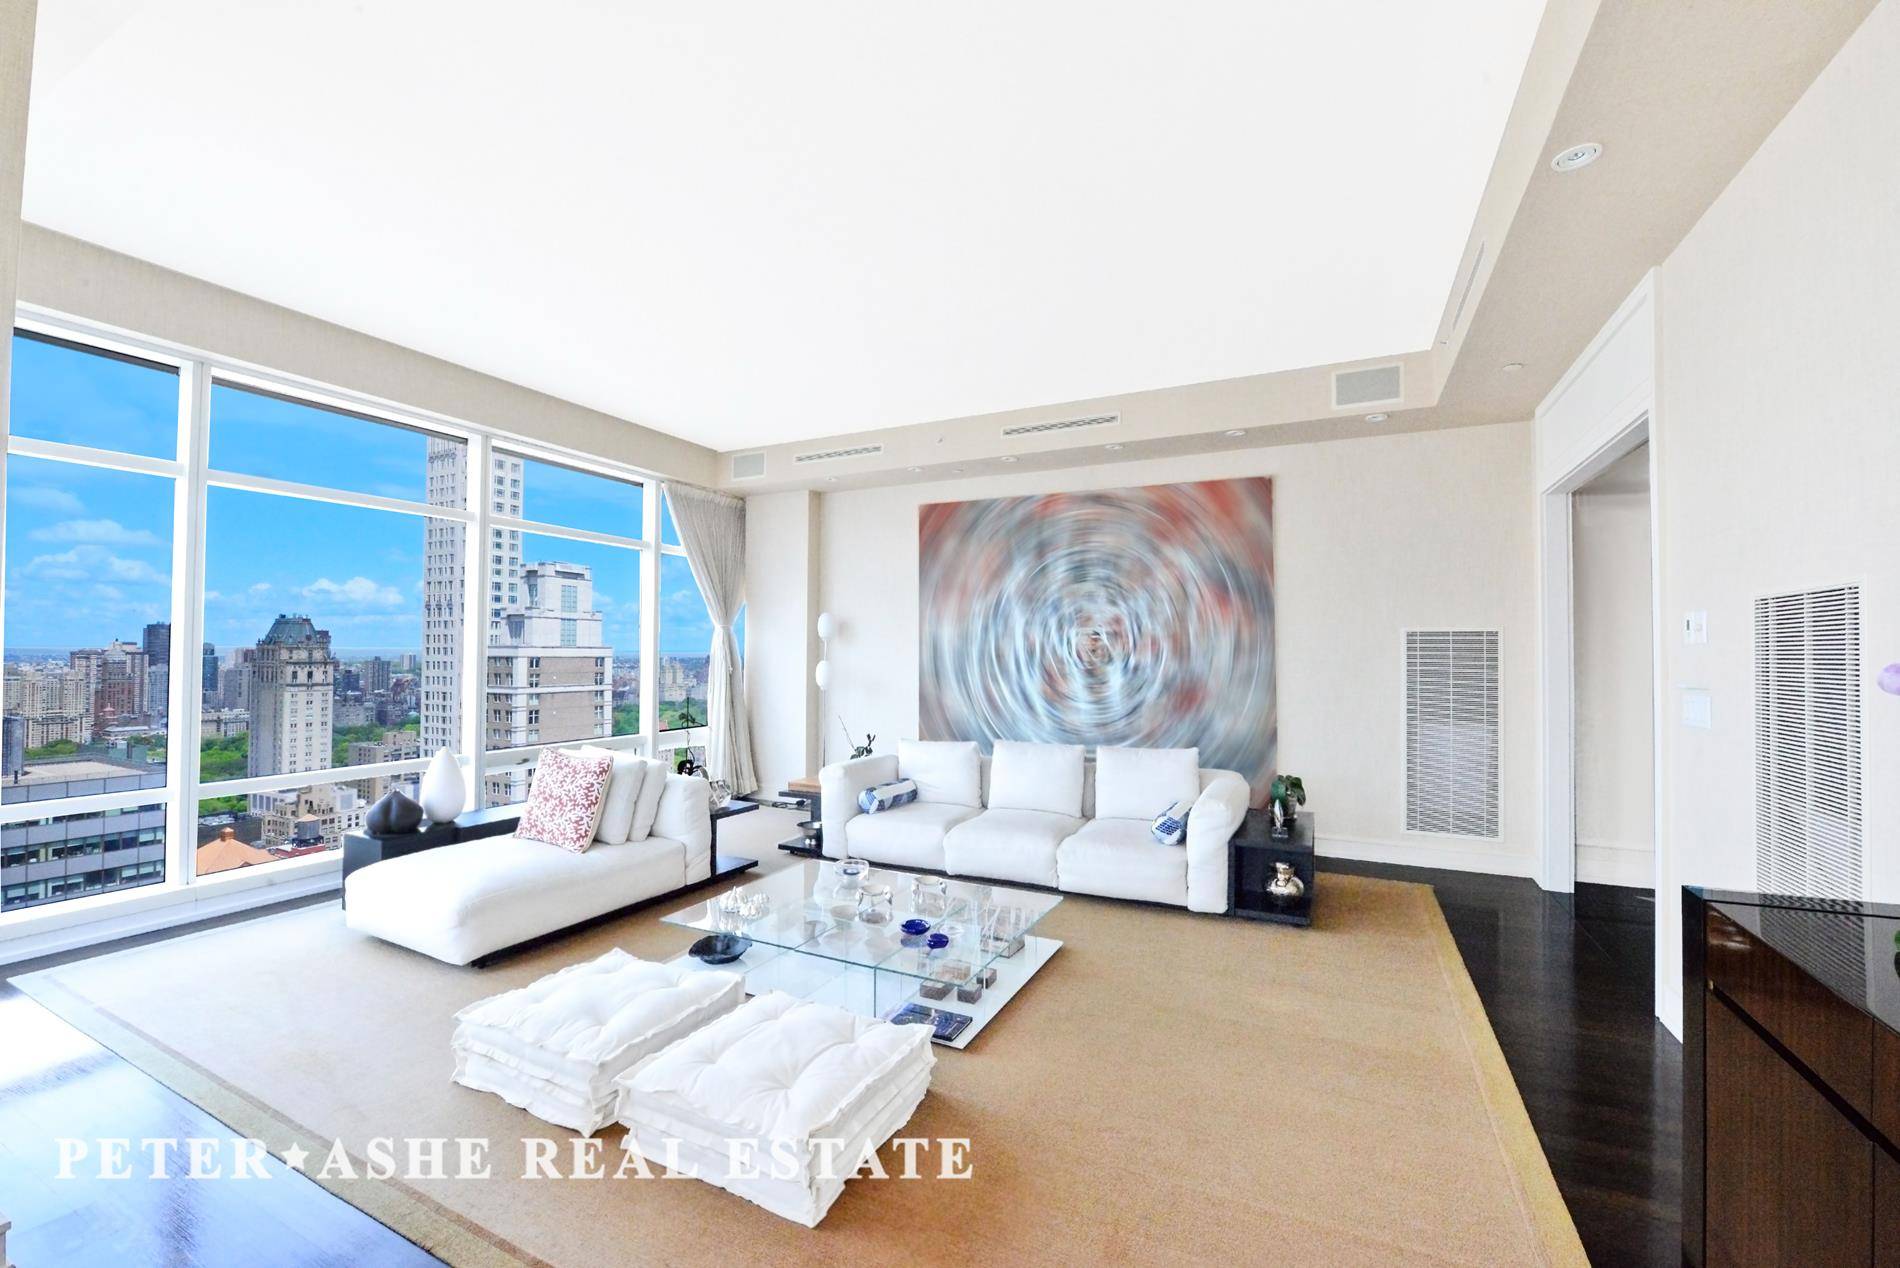 This sprawling three bedroom property with expansive terrace boasts stunning views of Central Park, The New York City skyline and the East River.